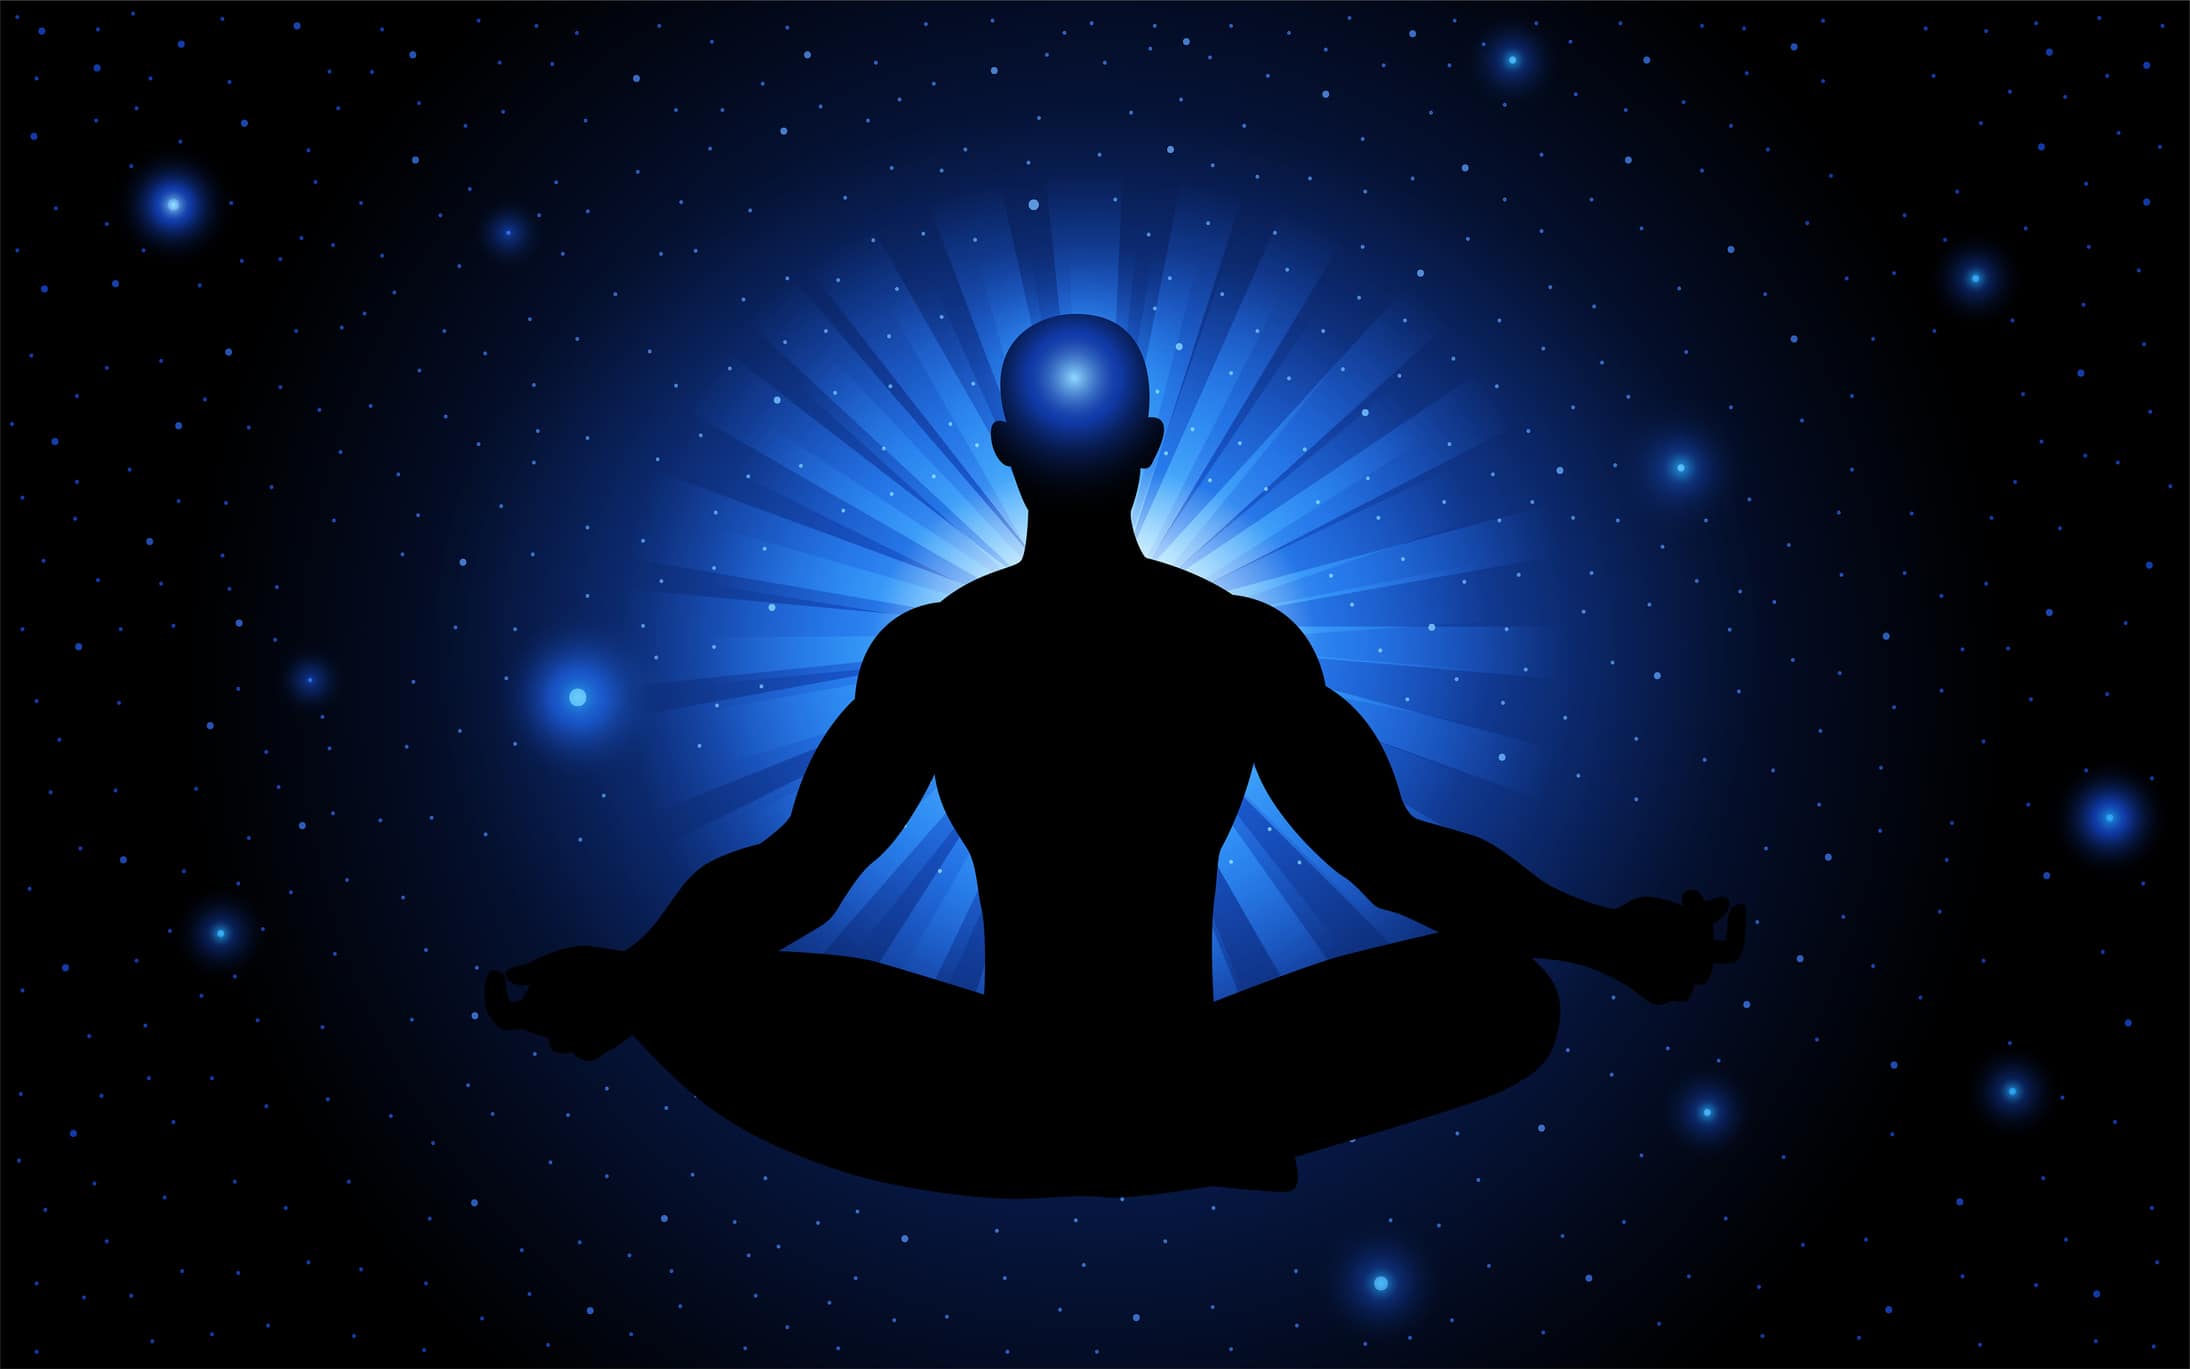 Silhouette of man in meditative position with a blue aura.